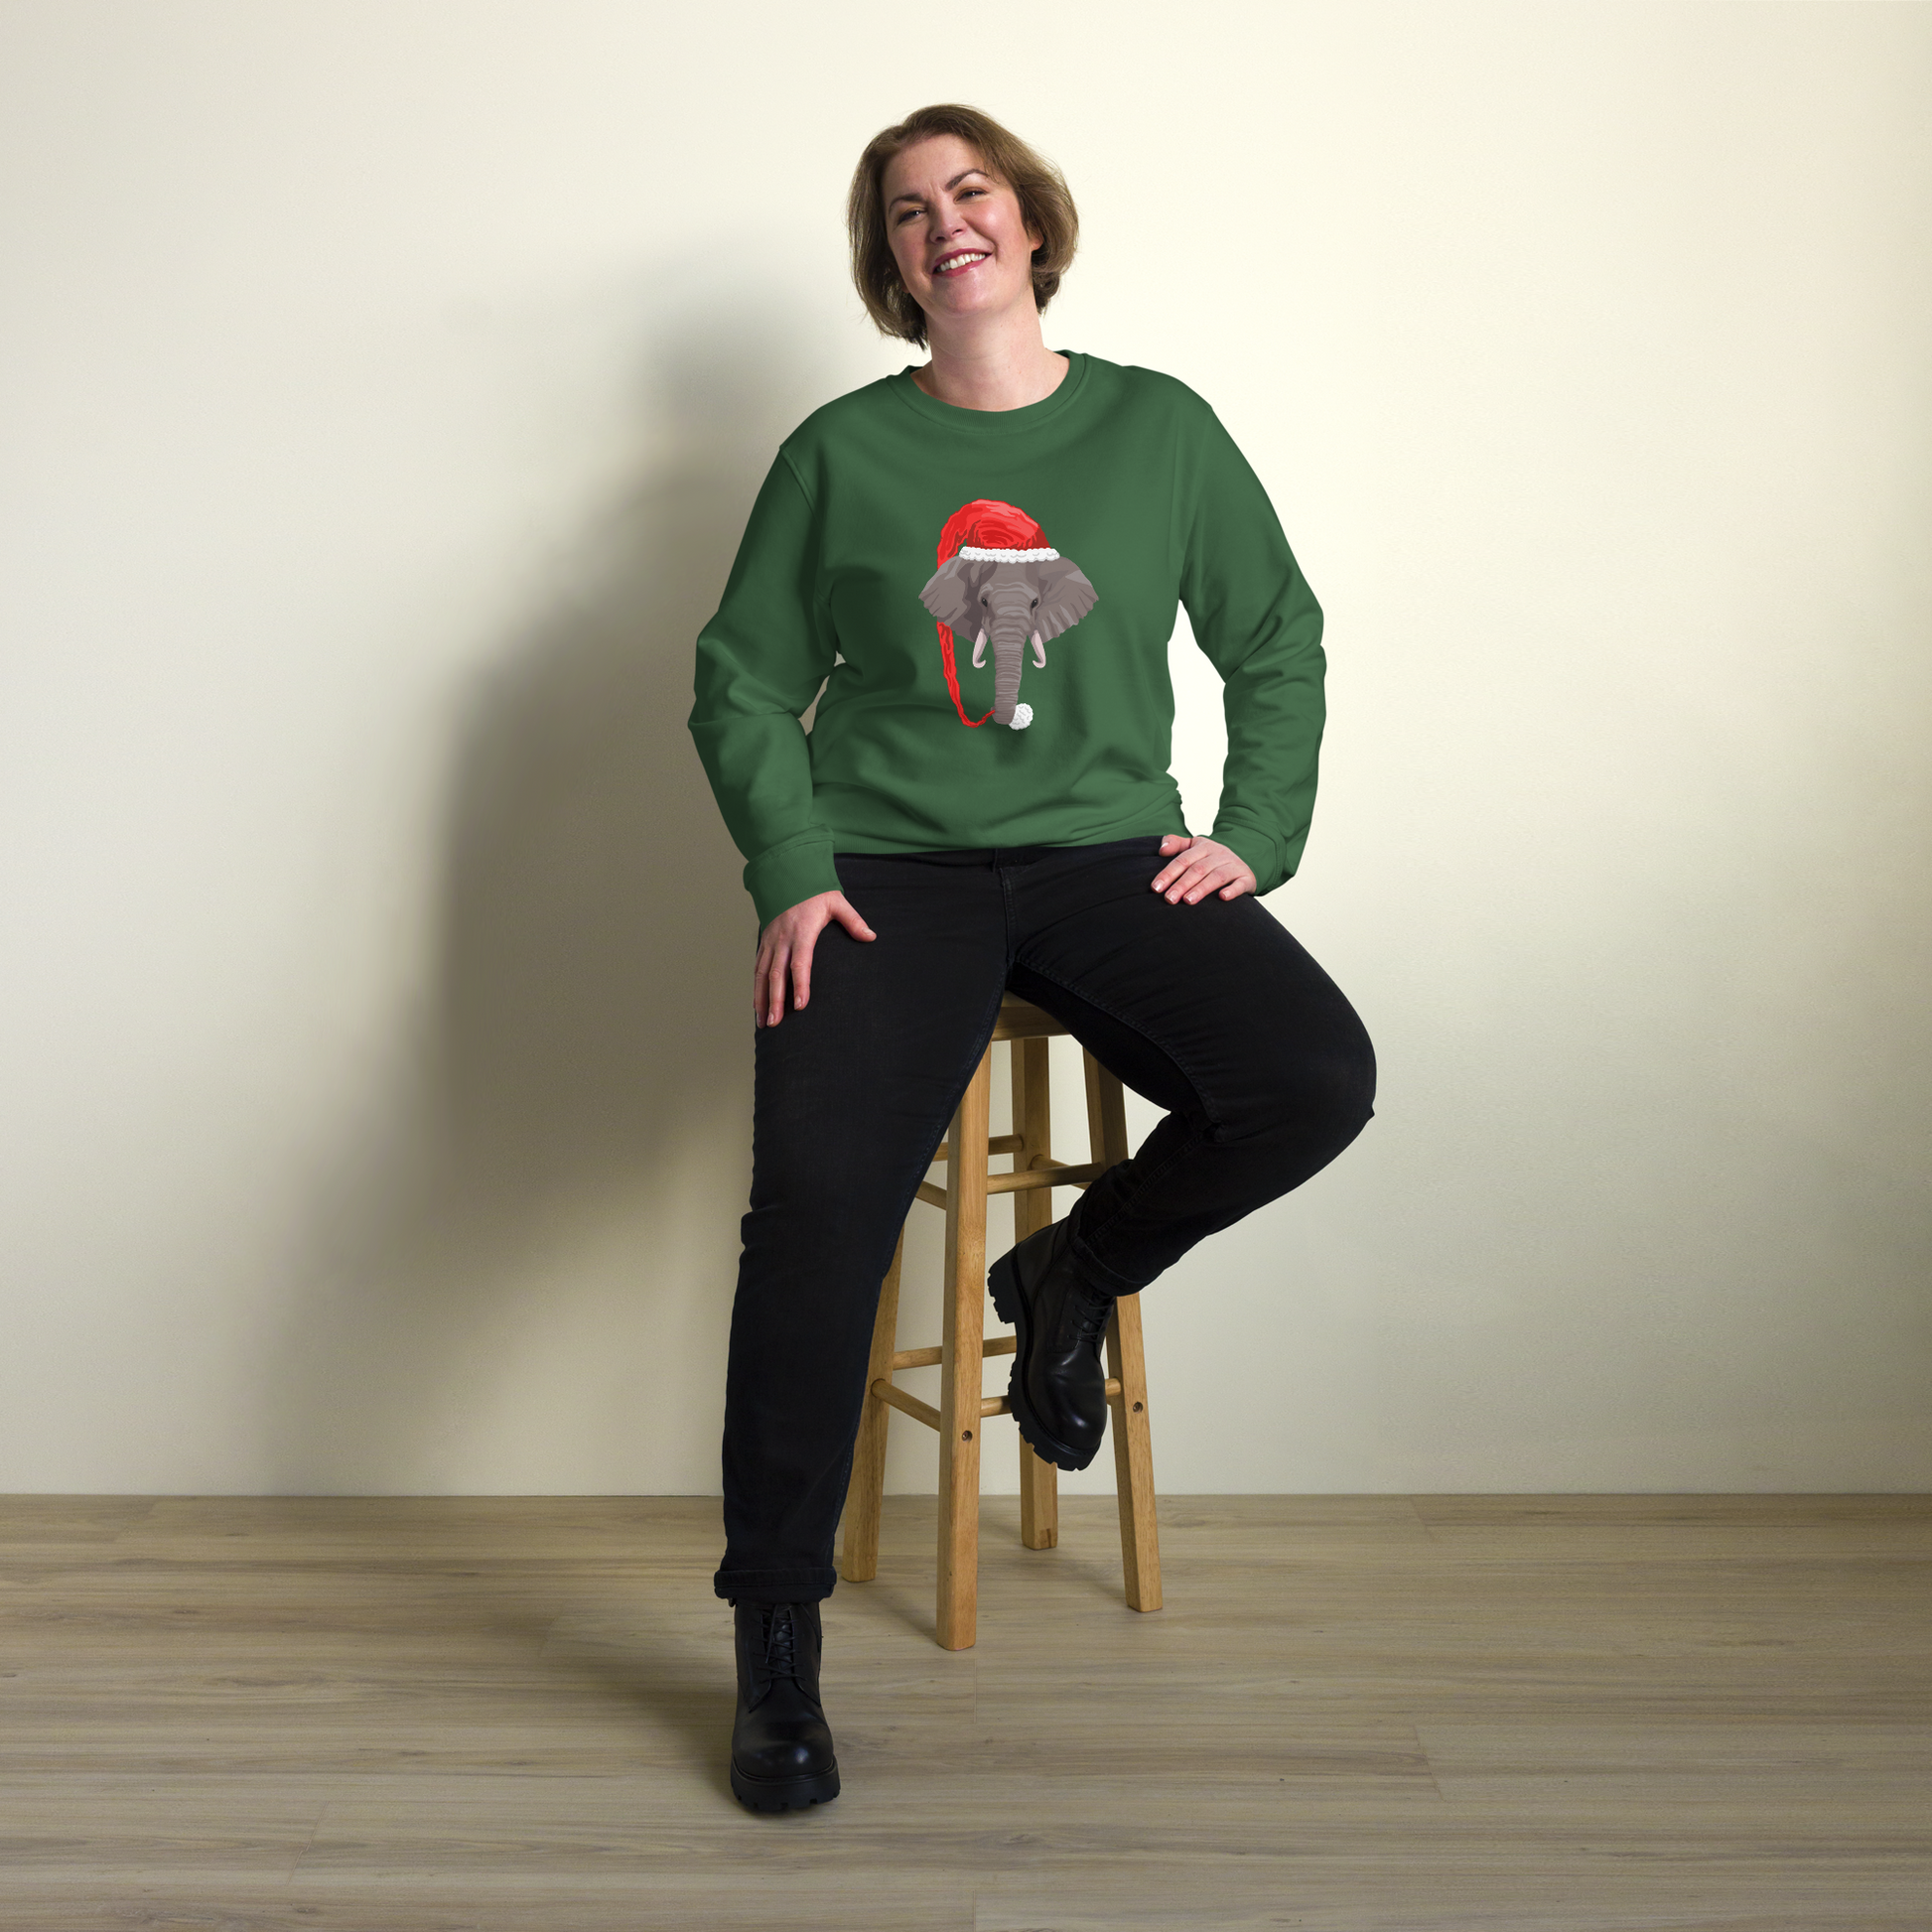 Smiling woman wearing a Bottle Green Organic Christmas Elephant Sweatshirt featuring a delight Elephant Wearing an Elf Hat graphic on the chest - Funny Christmas Graphic Elephant Sweatshirts - Boozy Fox